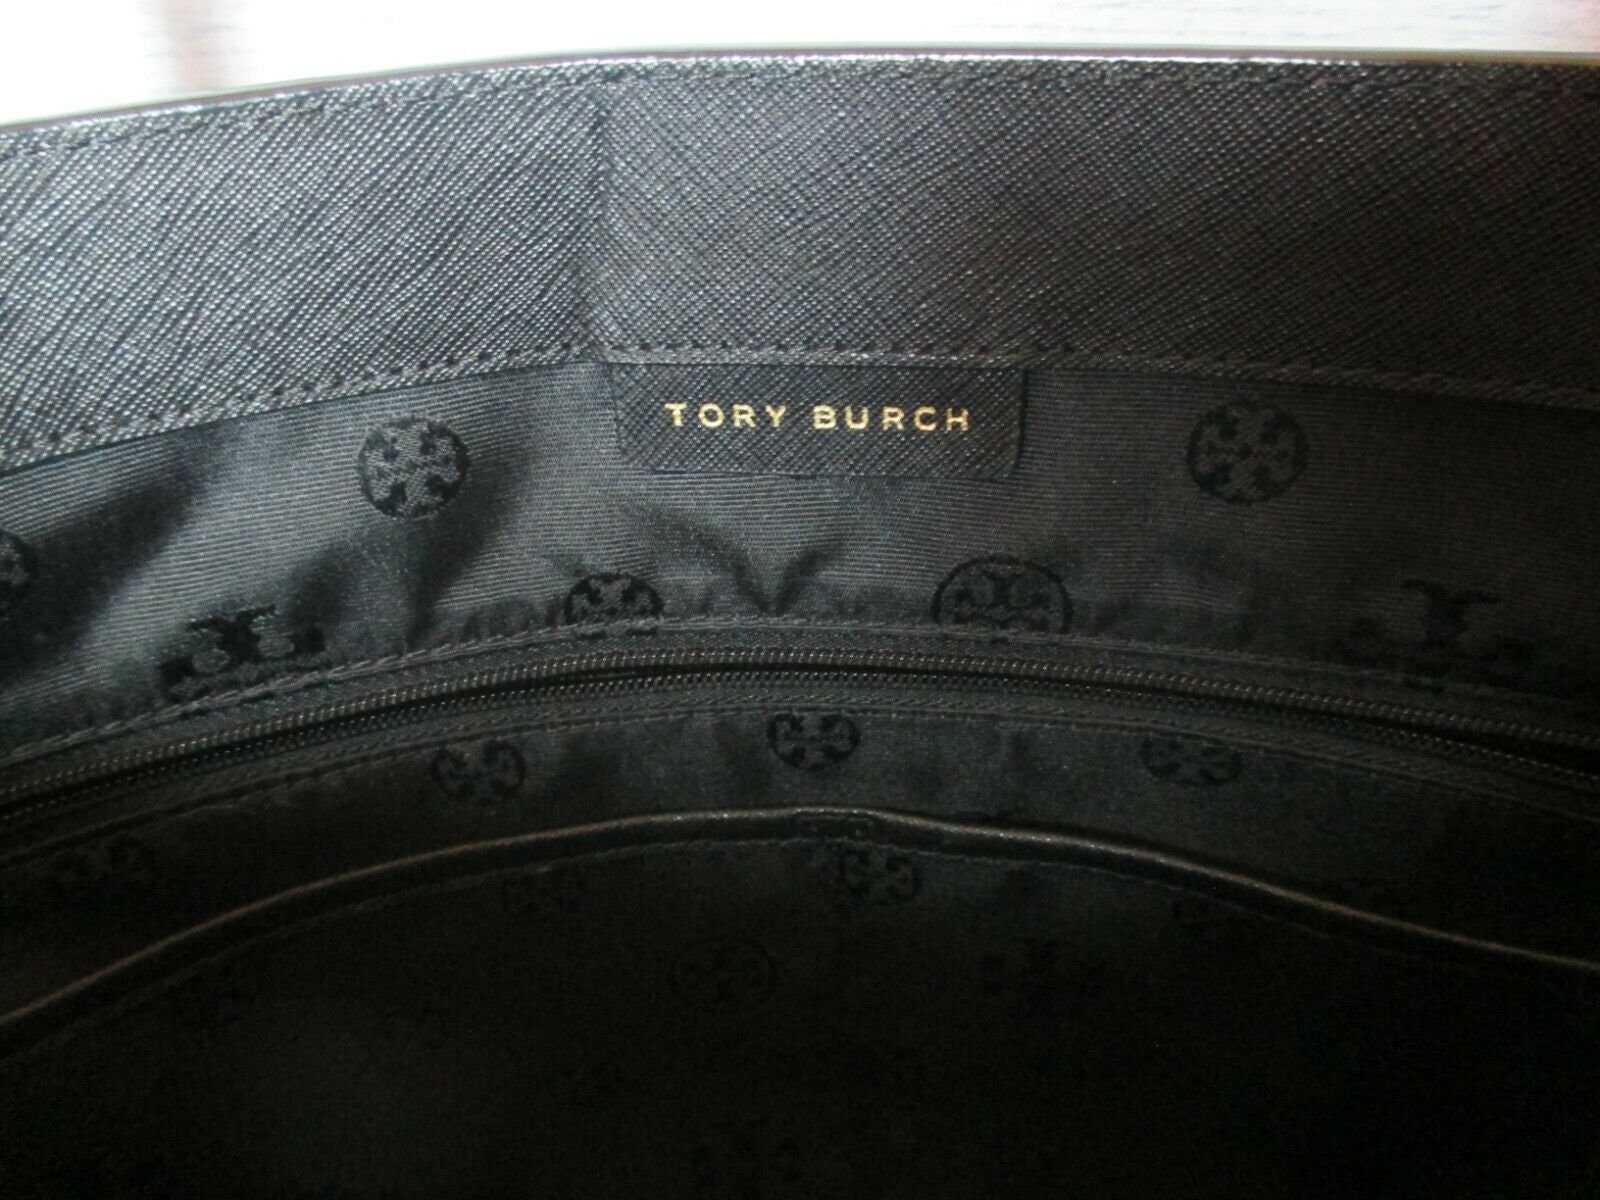 Tory Burch York Black Small Buckle Tote Excellent Condition!